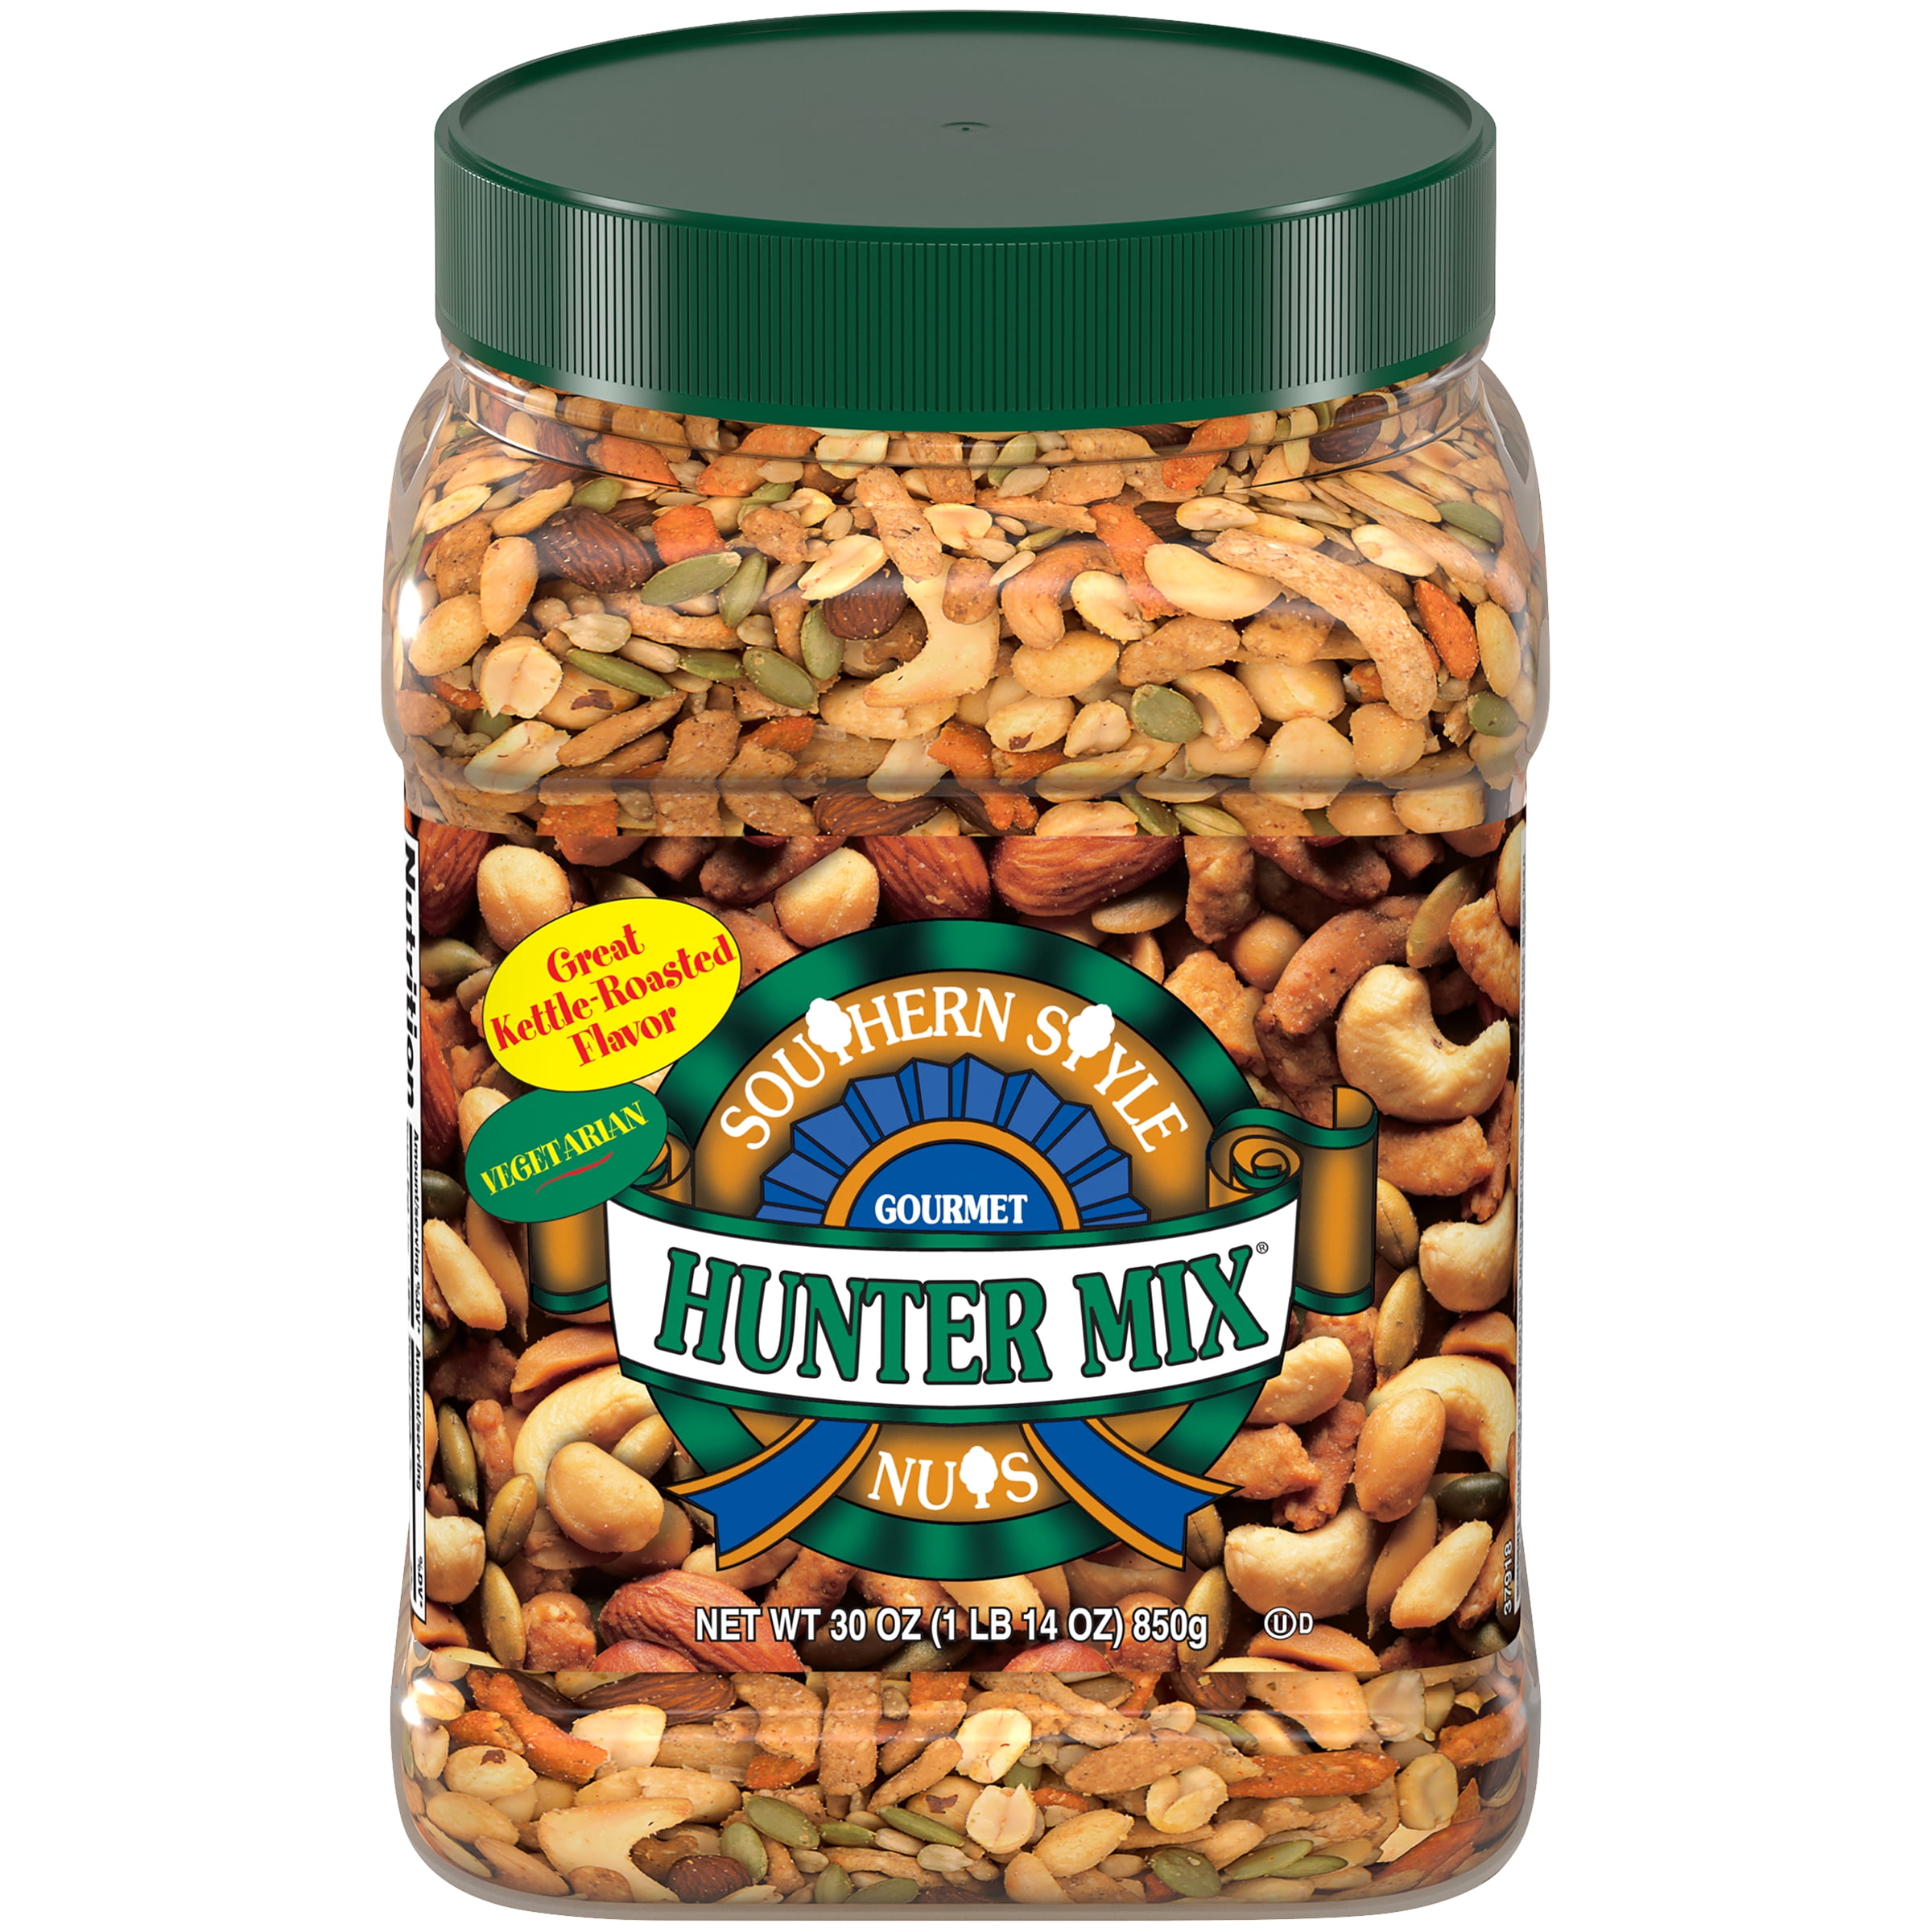 Southern Style Nuts, Hunter Mix, Gourmet, 30 Oz